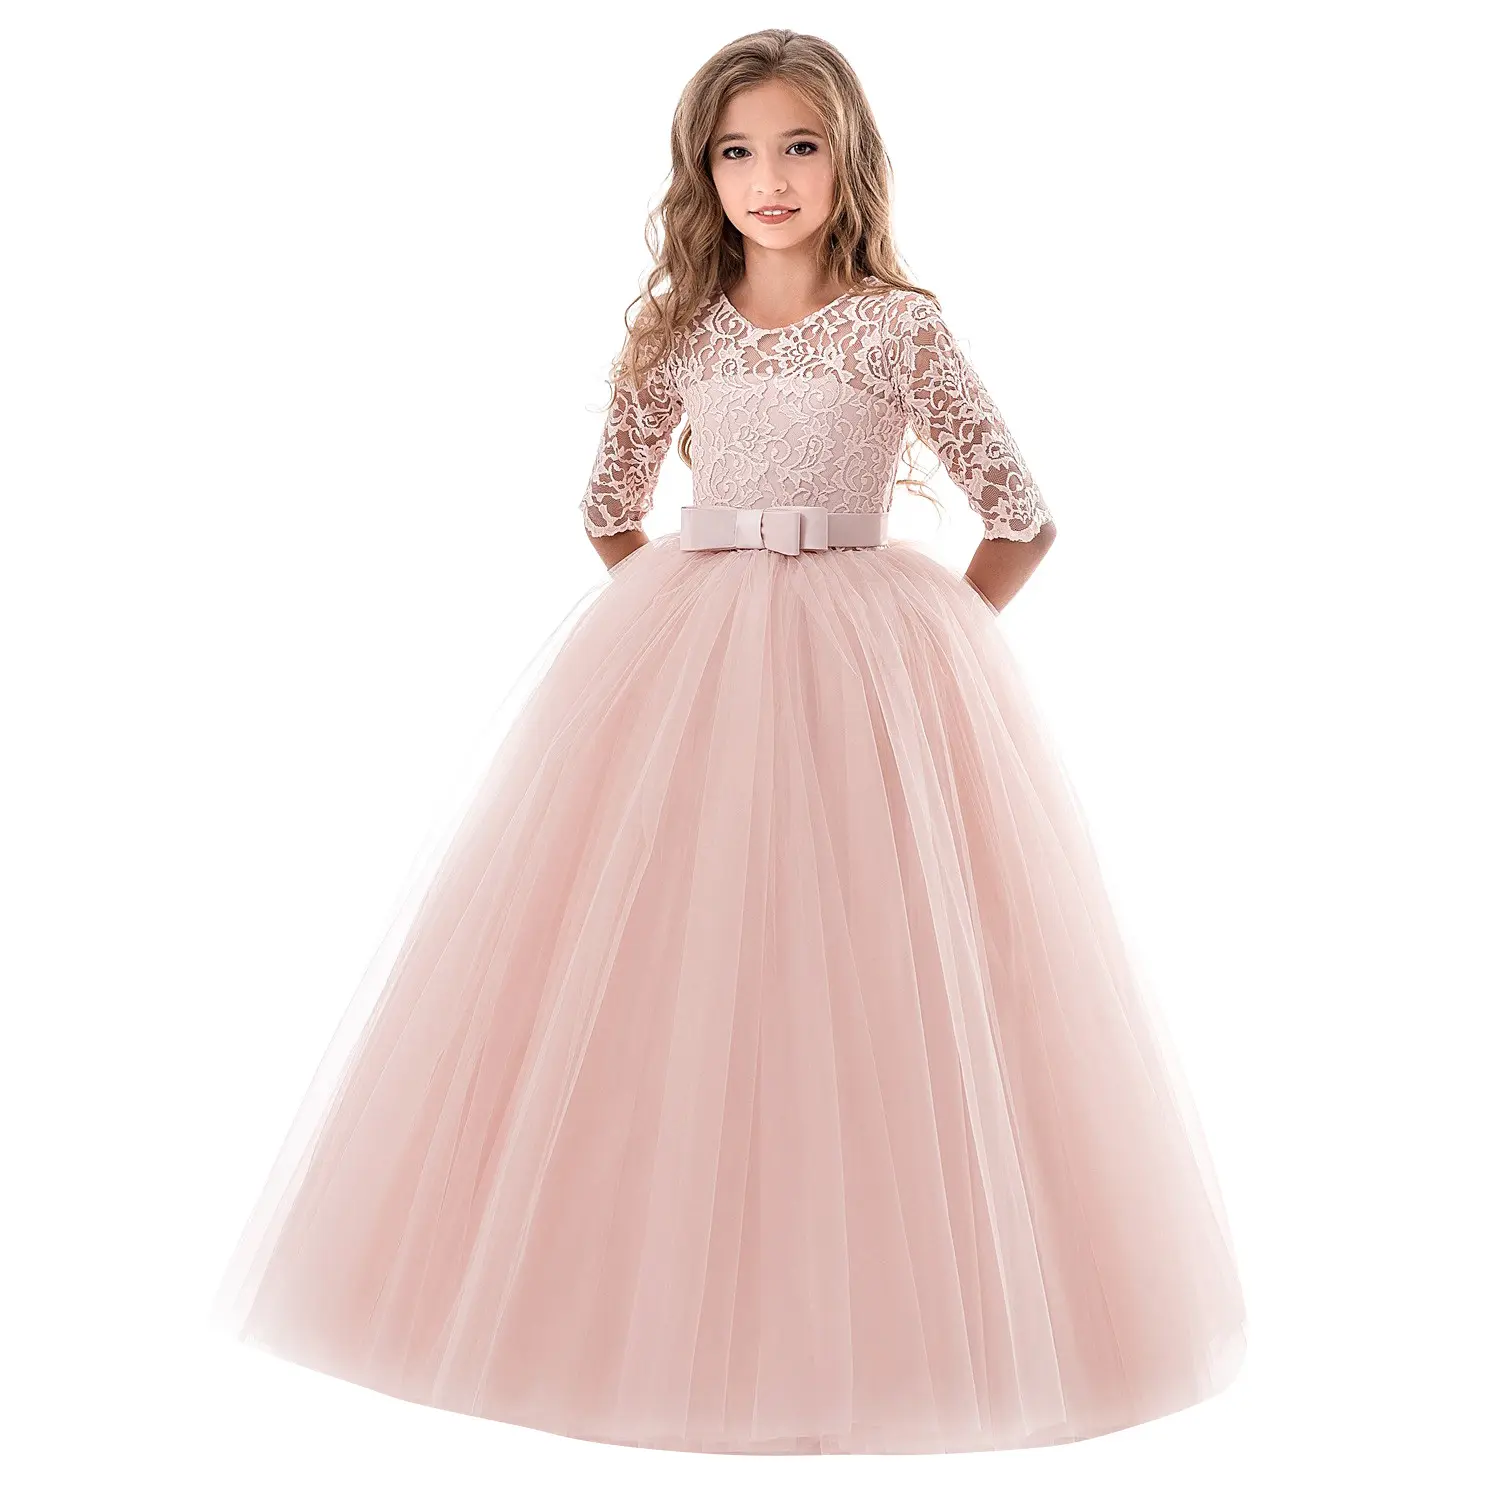 Summer Teenage Girls Dress Children's Clothing Baby Lace Wedding Ceremony Party Elegant Princess Long Tulle Prom Dresses